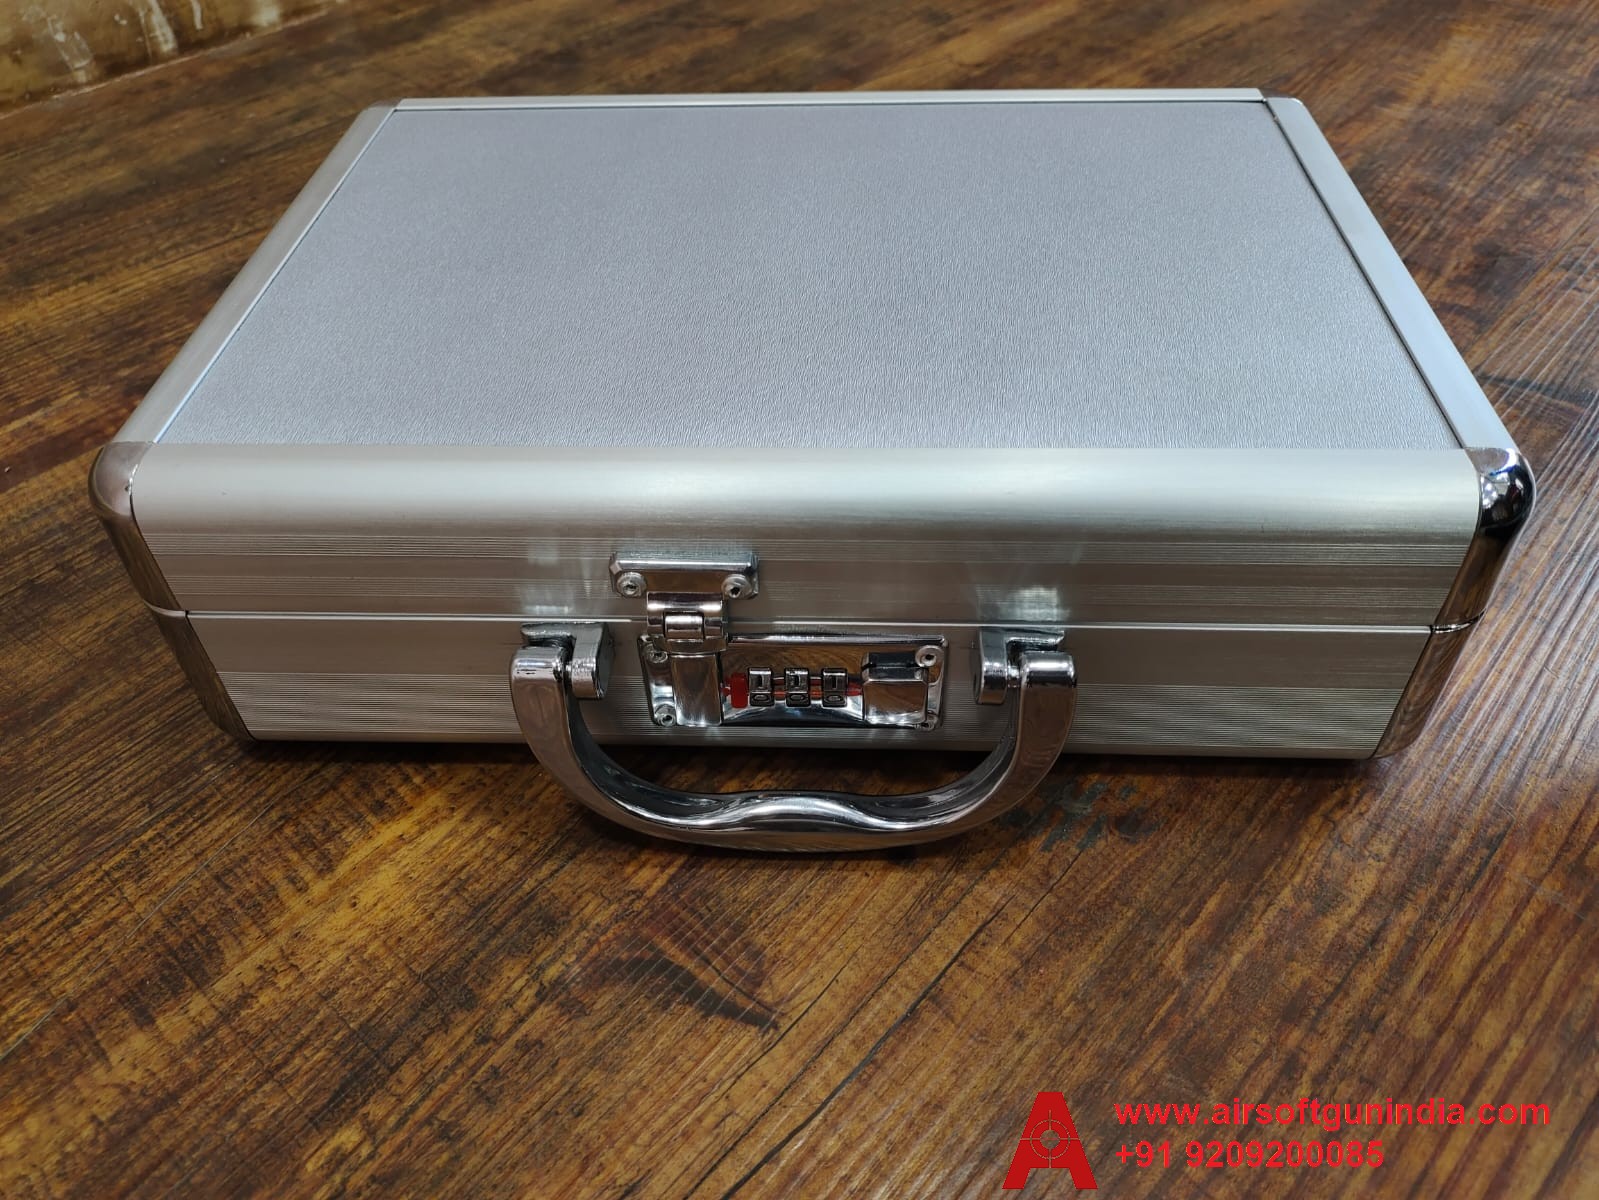 Premium Aluminum Case / Box Silver With Safety Lock By Airsoft Gun India